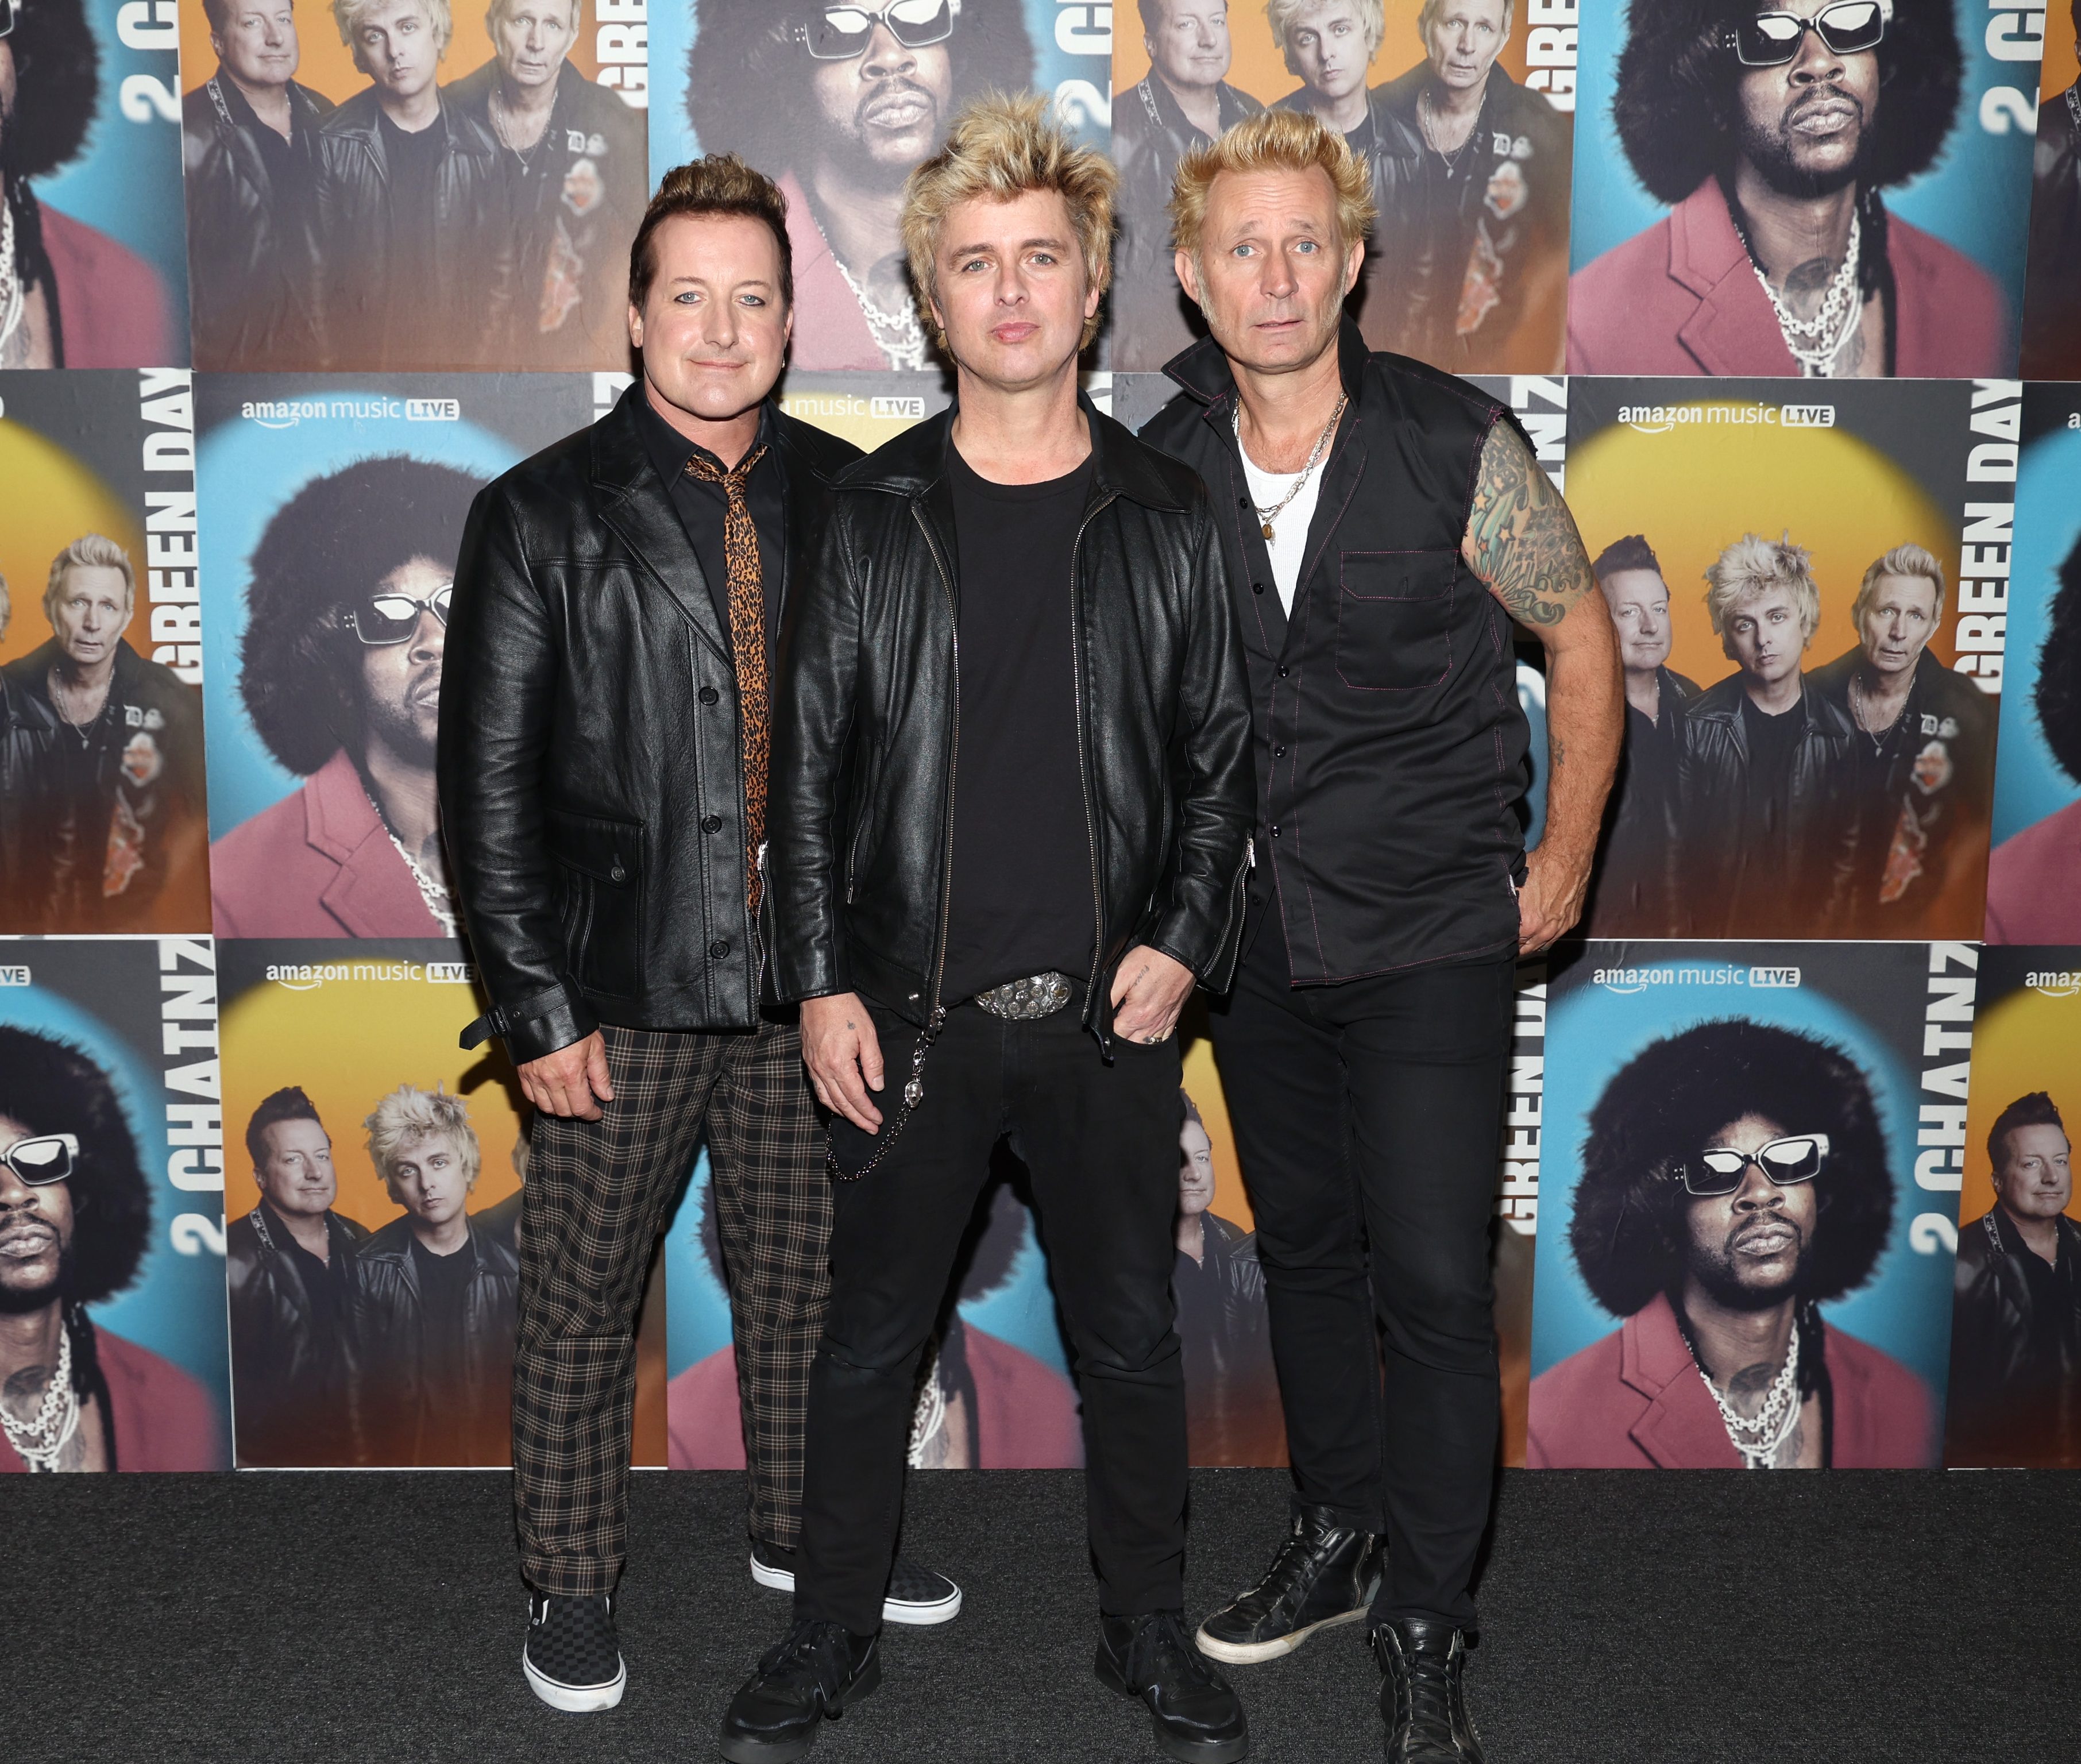 Tre Cool, Billie Joe Armstrong and Mike Dirnt of Green Day